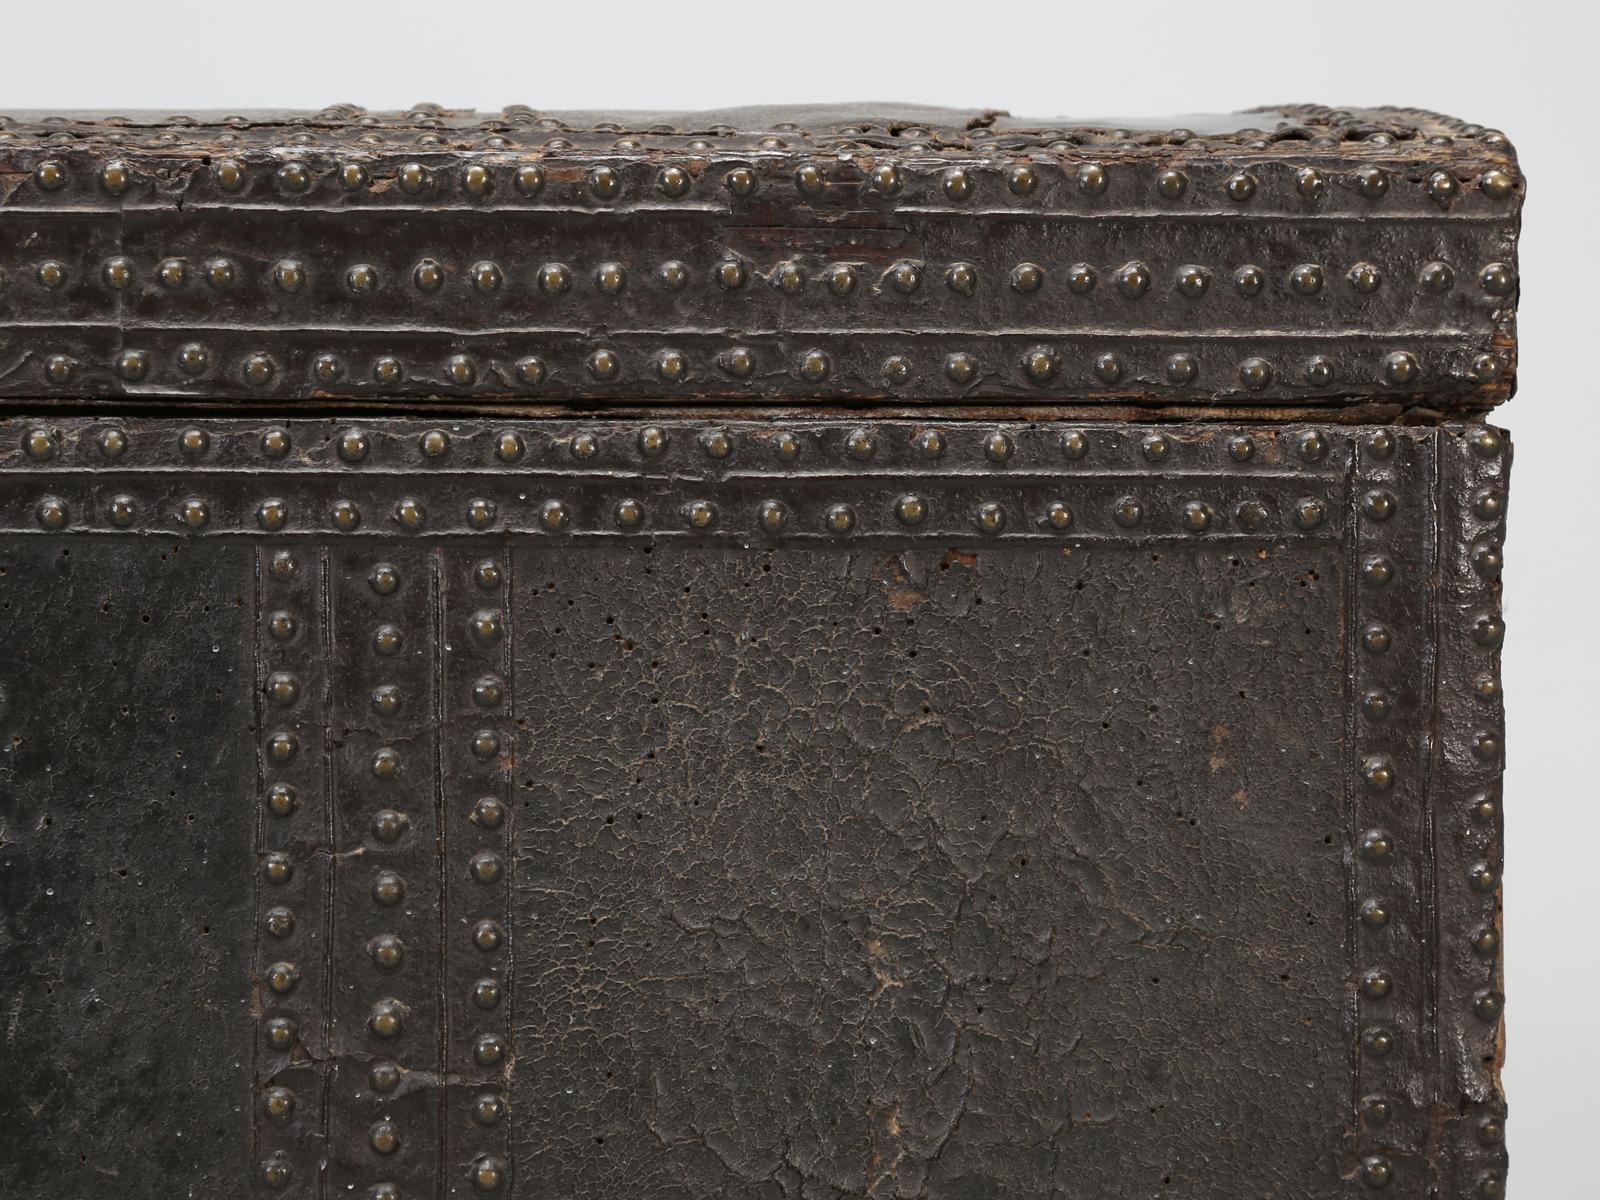 Hand-Crafted Antique Spanish Leather Trunk and a Barley Twist Stand, circa 1600s